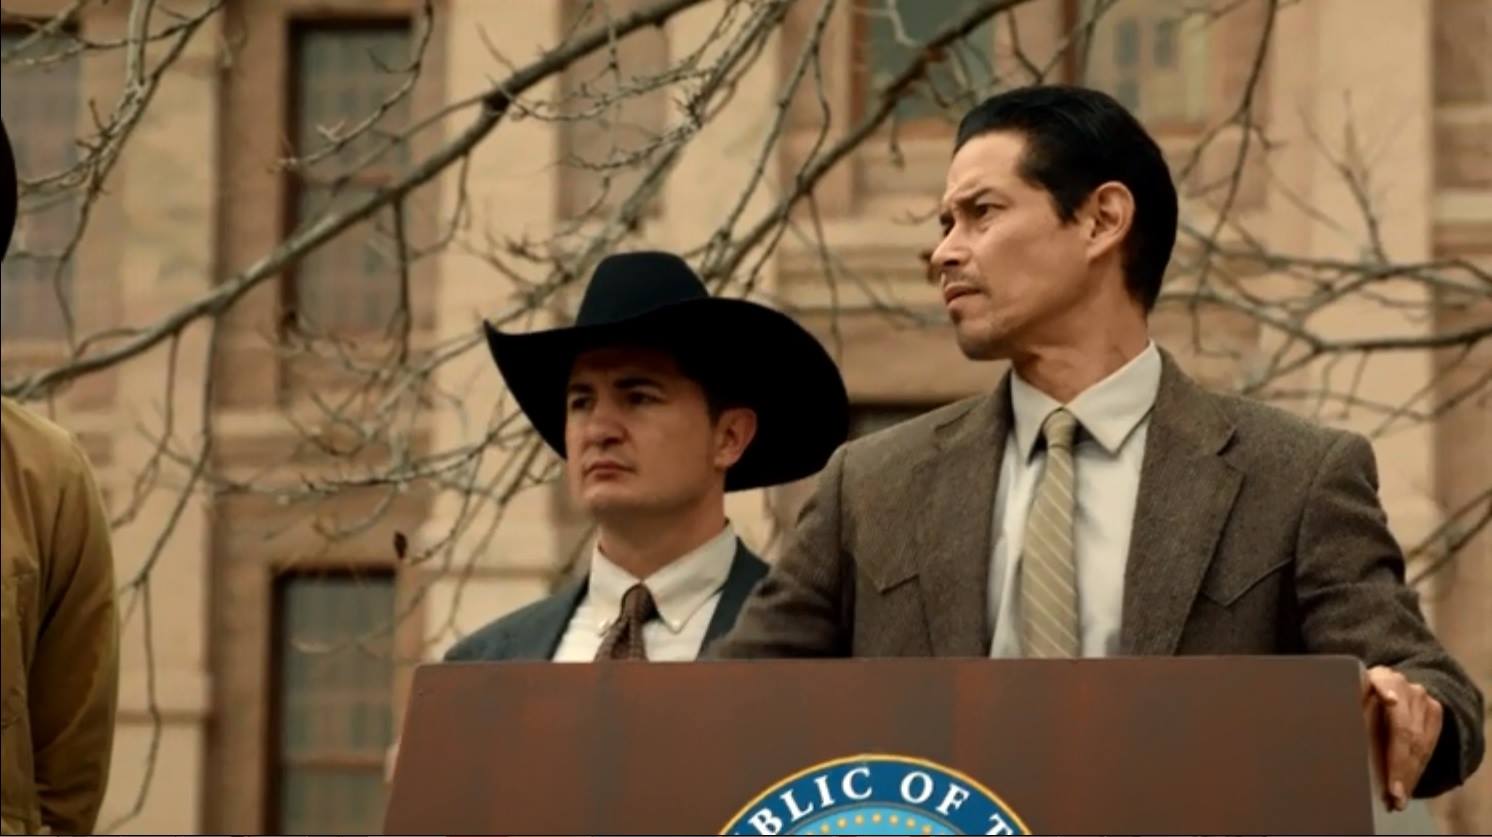 Chad Parma (in cowboy hat) with Anthony Ruivivar.